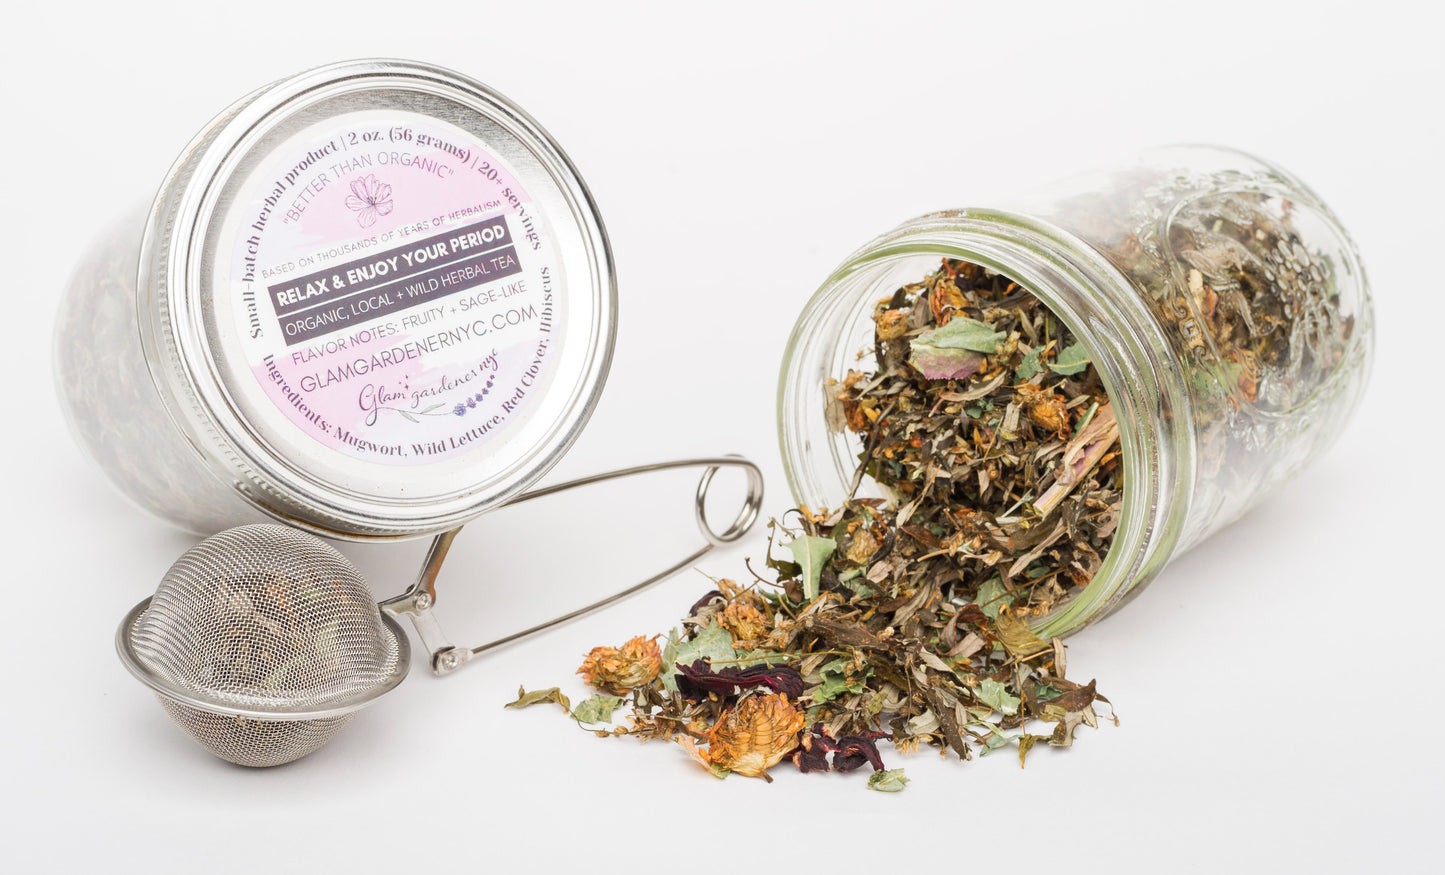 Relax & Enjoy Your Period looseleaf herbal tea with mugwort, red clover, wild lettuce, and hibiscus for a pleasant period and PMS relief